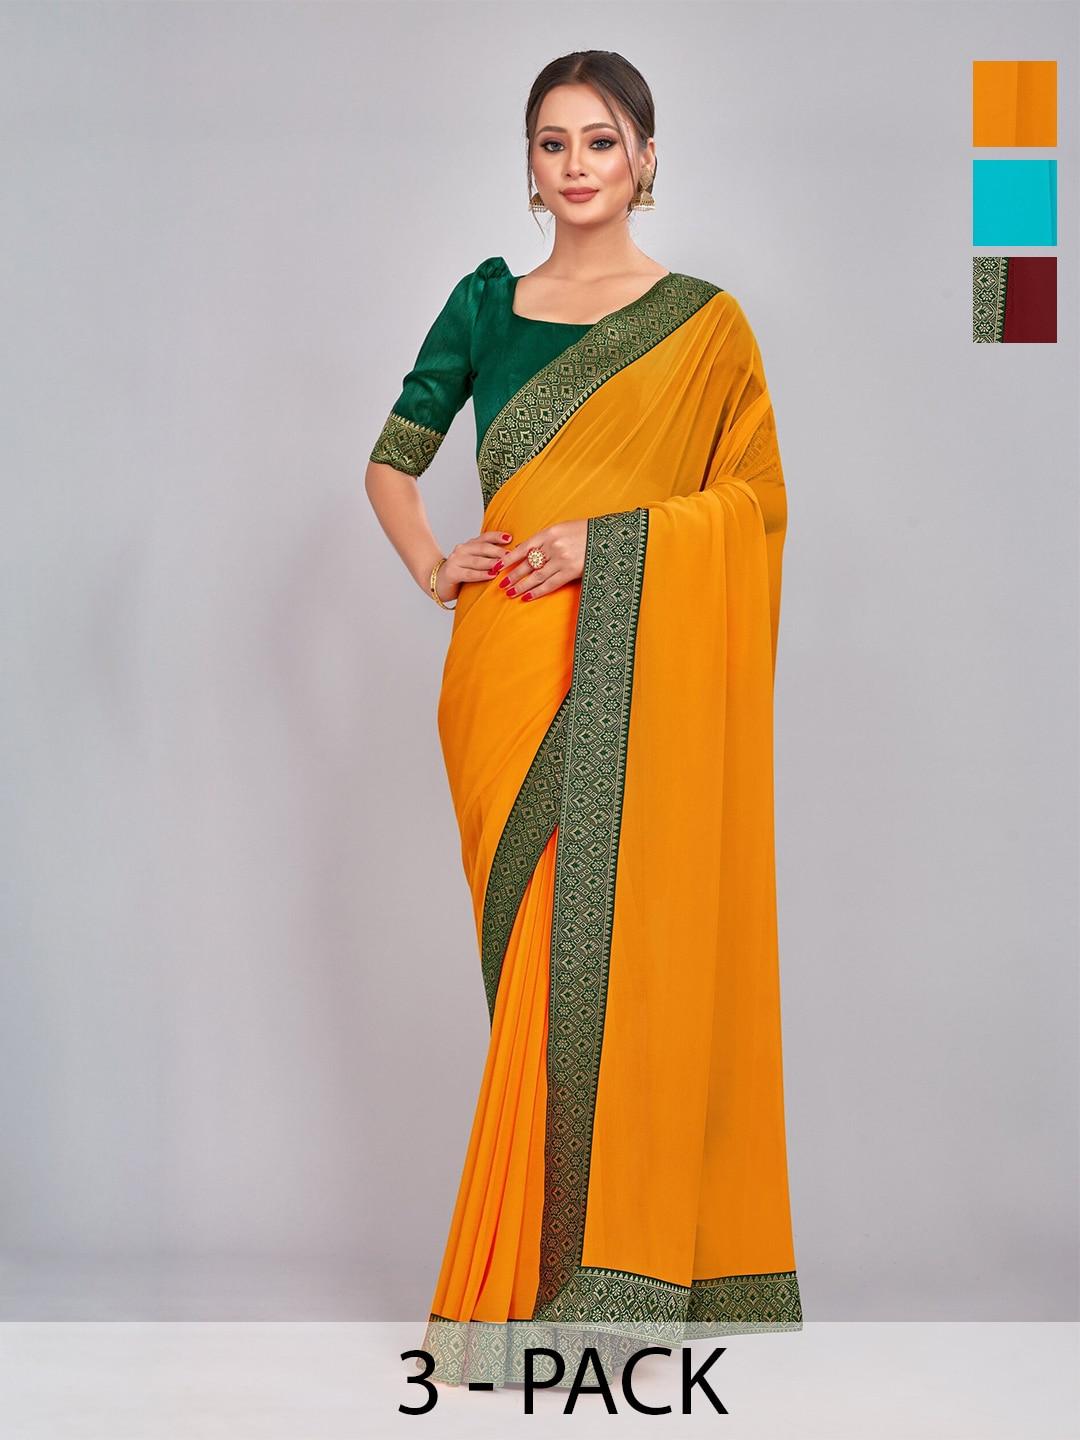 castillofab selection of 3 zari detailed pure georgette sarees